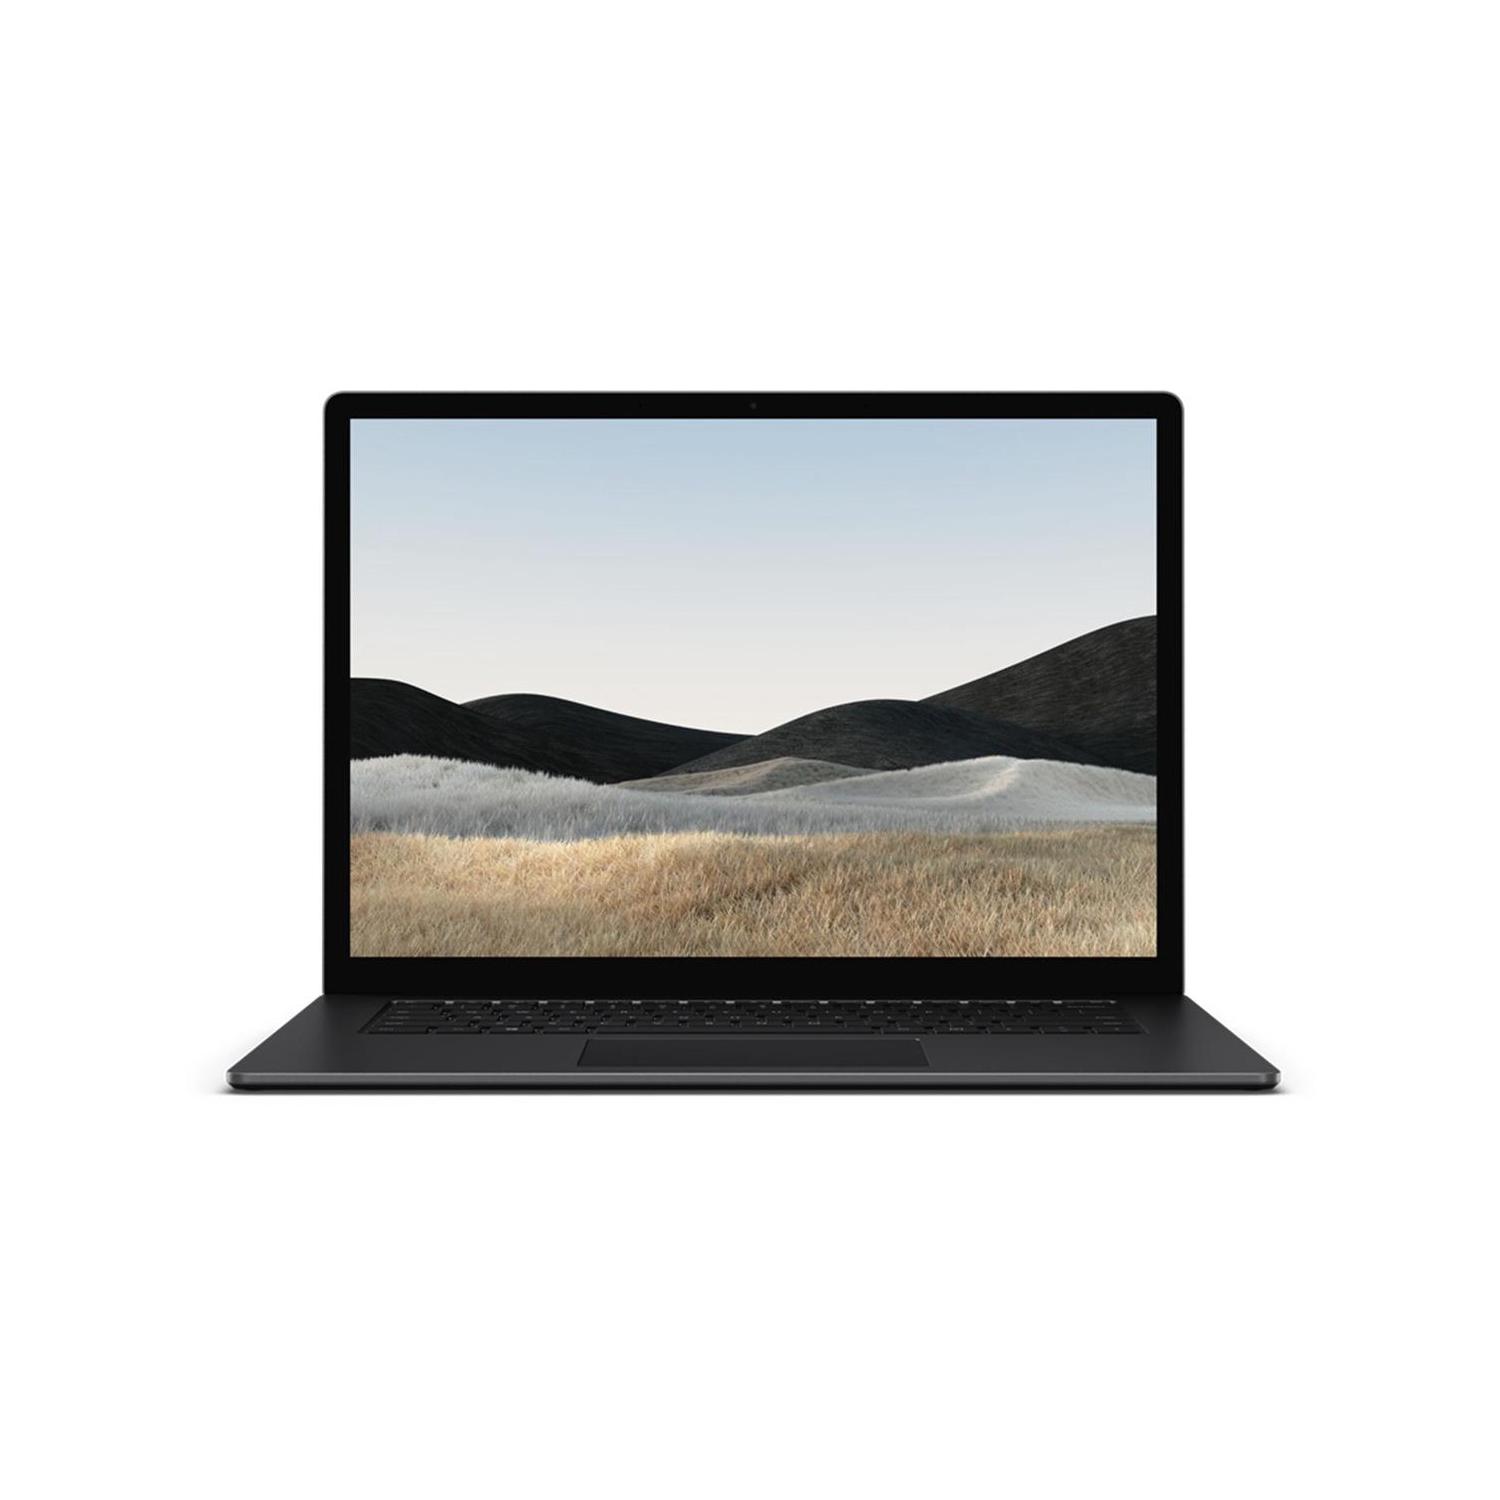 Refurbished (Excellent) - Microsoft Surface Laptop 4 13.5'' Touchscreen Laptop (Intel i7-1185G7/256GB SSD/16GB RAM/Win11Pro)